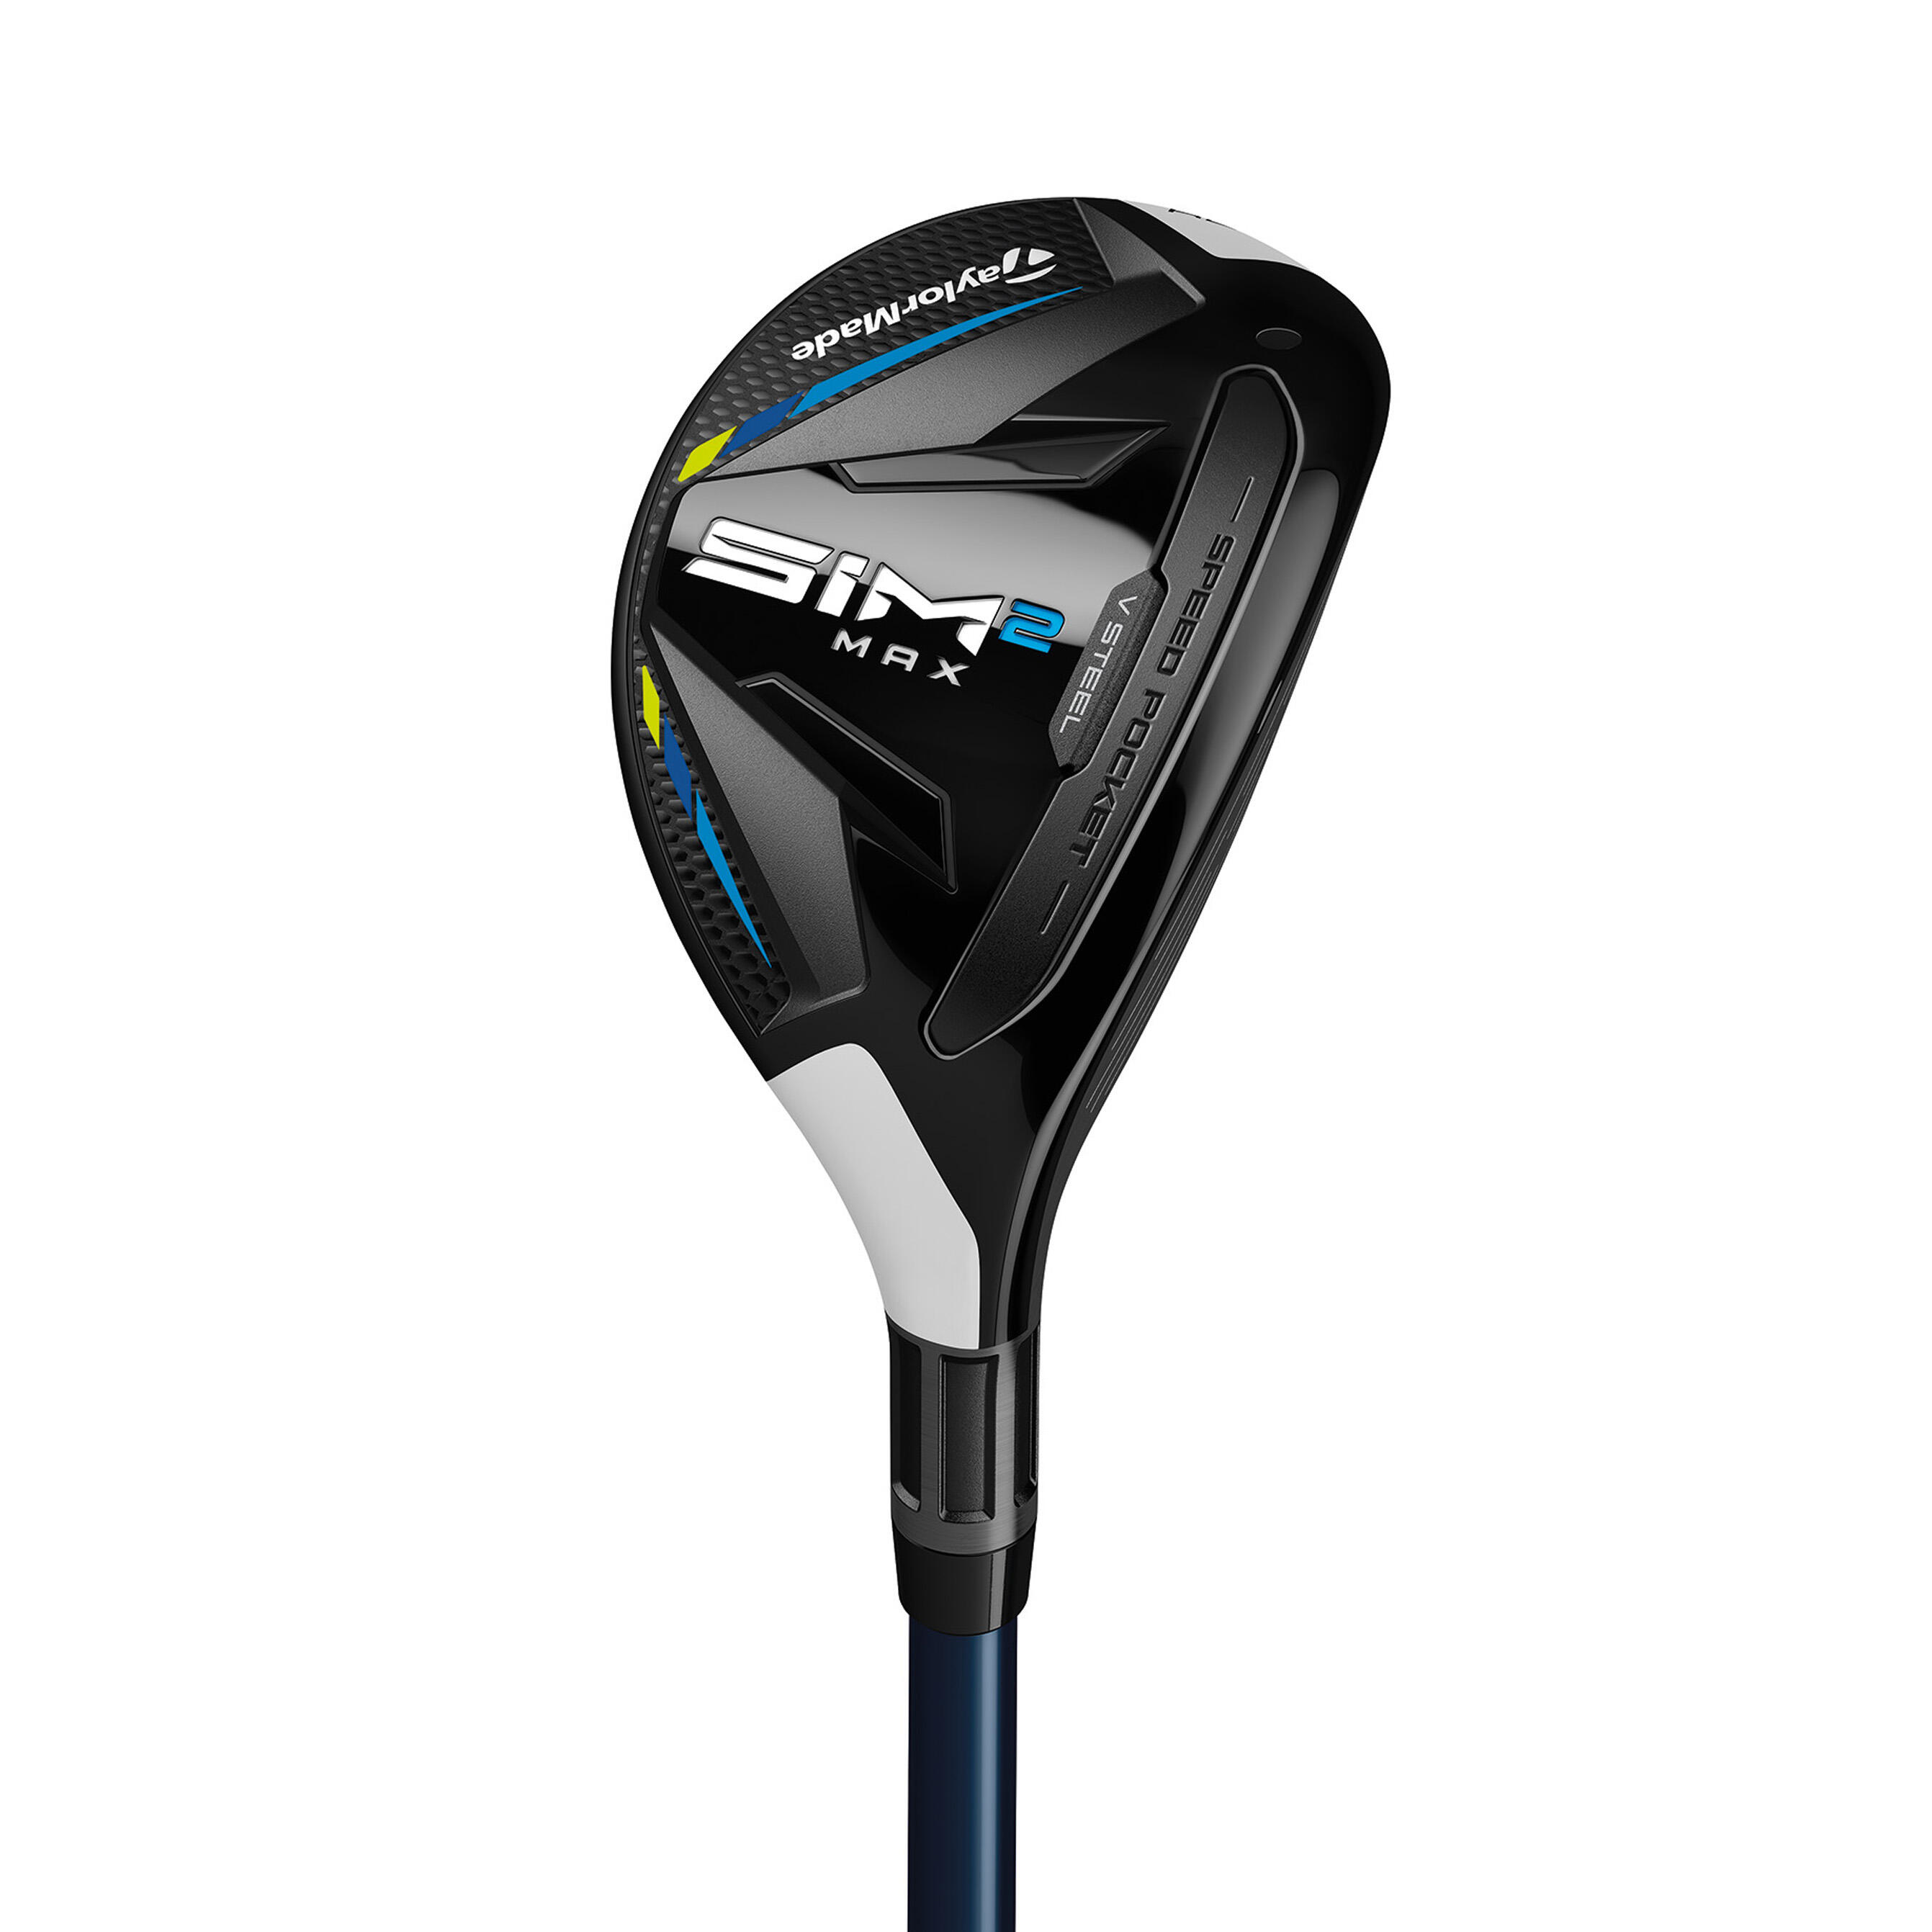 TAYLORMADE Hybride Golf Droitier Lady - Taylormade Sim2 Max